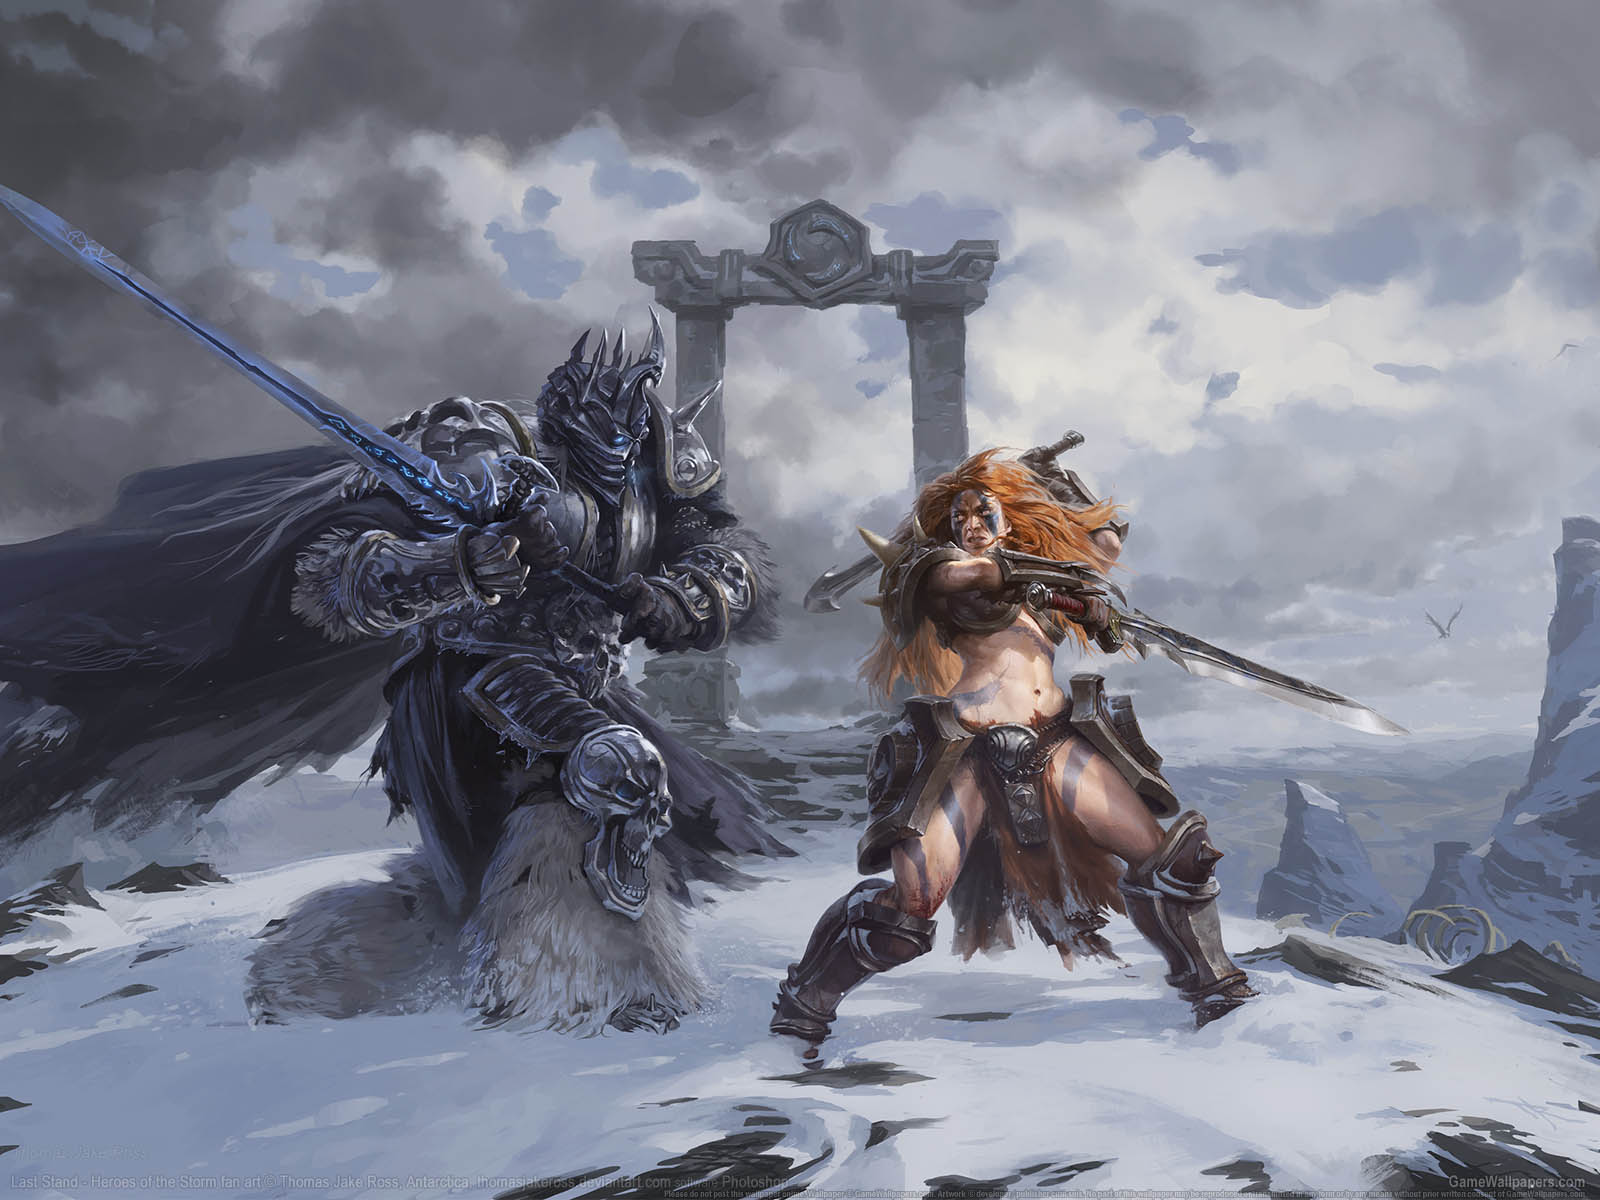 Heroes of the Storm fan art achtergrond 05 1600x1200